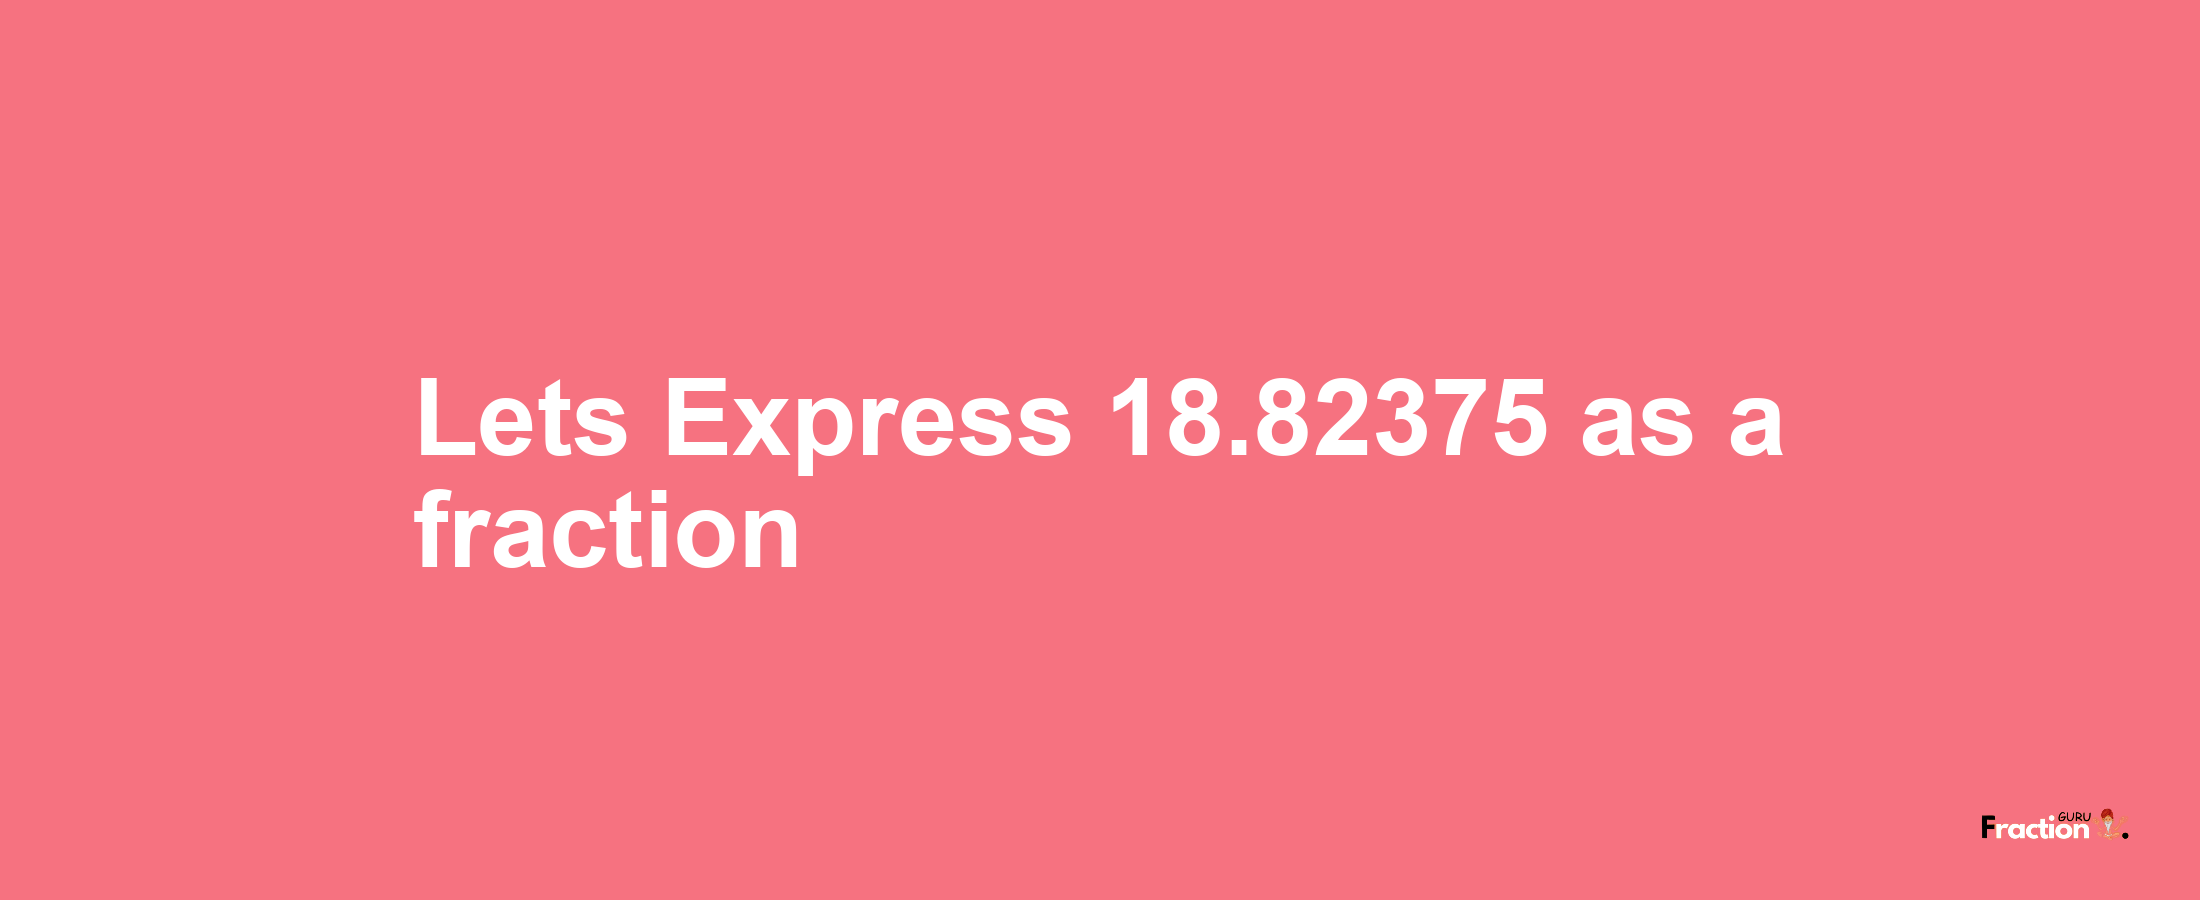 Lets Express 18.82375 as afraction